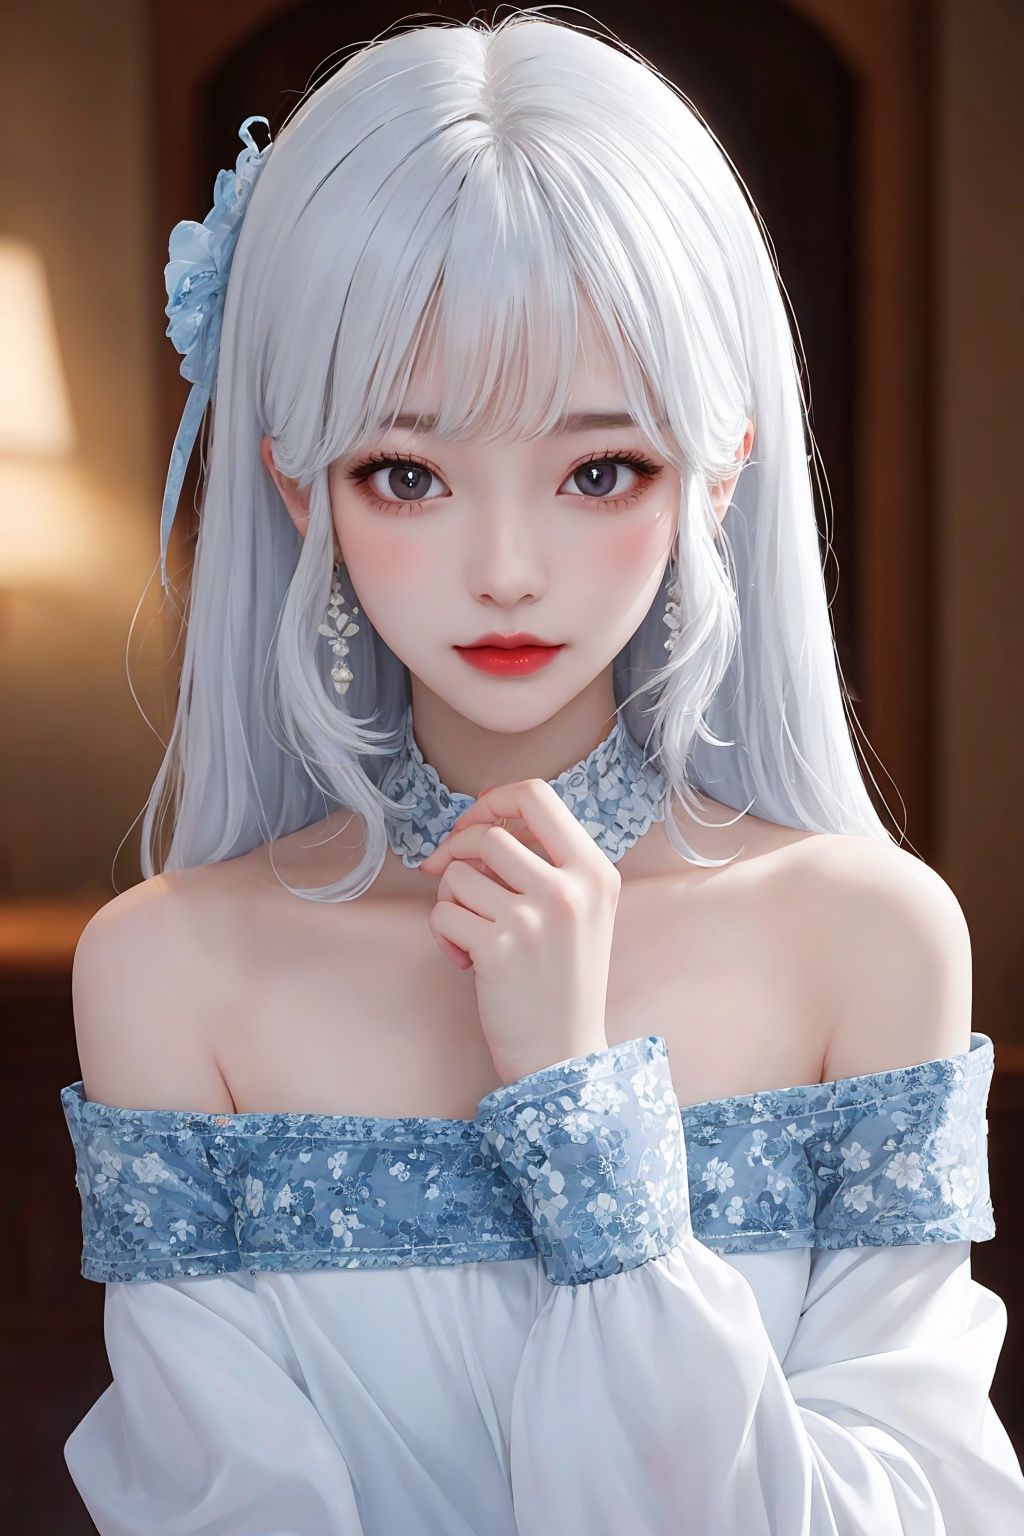 A girl,with a bust,exquisite decoration,long white hair,off-the-shoulder,blue and white tone,rosy lips,high nose and exquisite facial features,